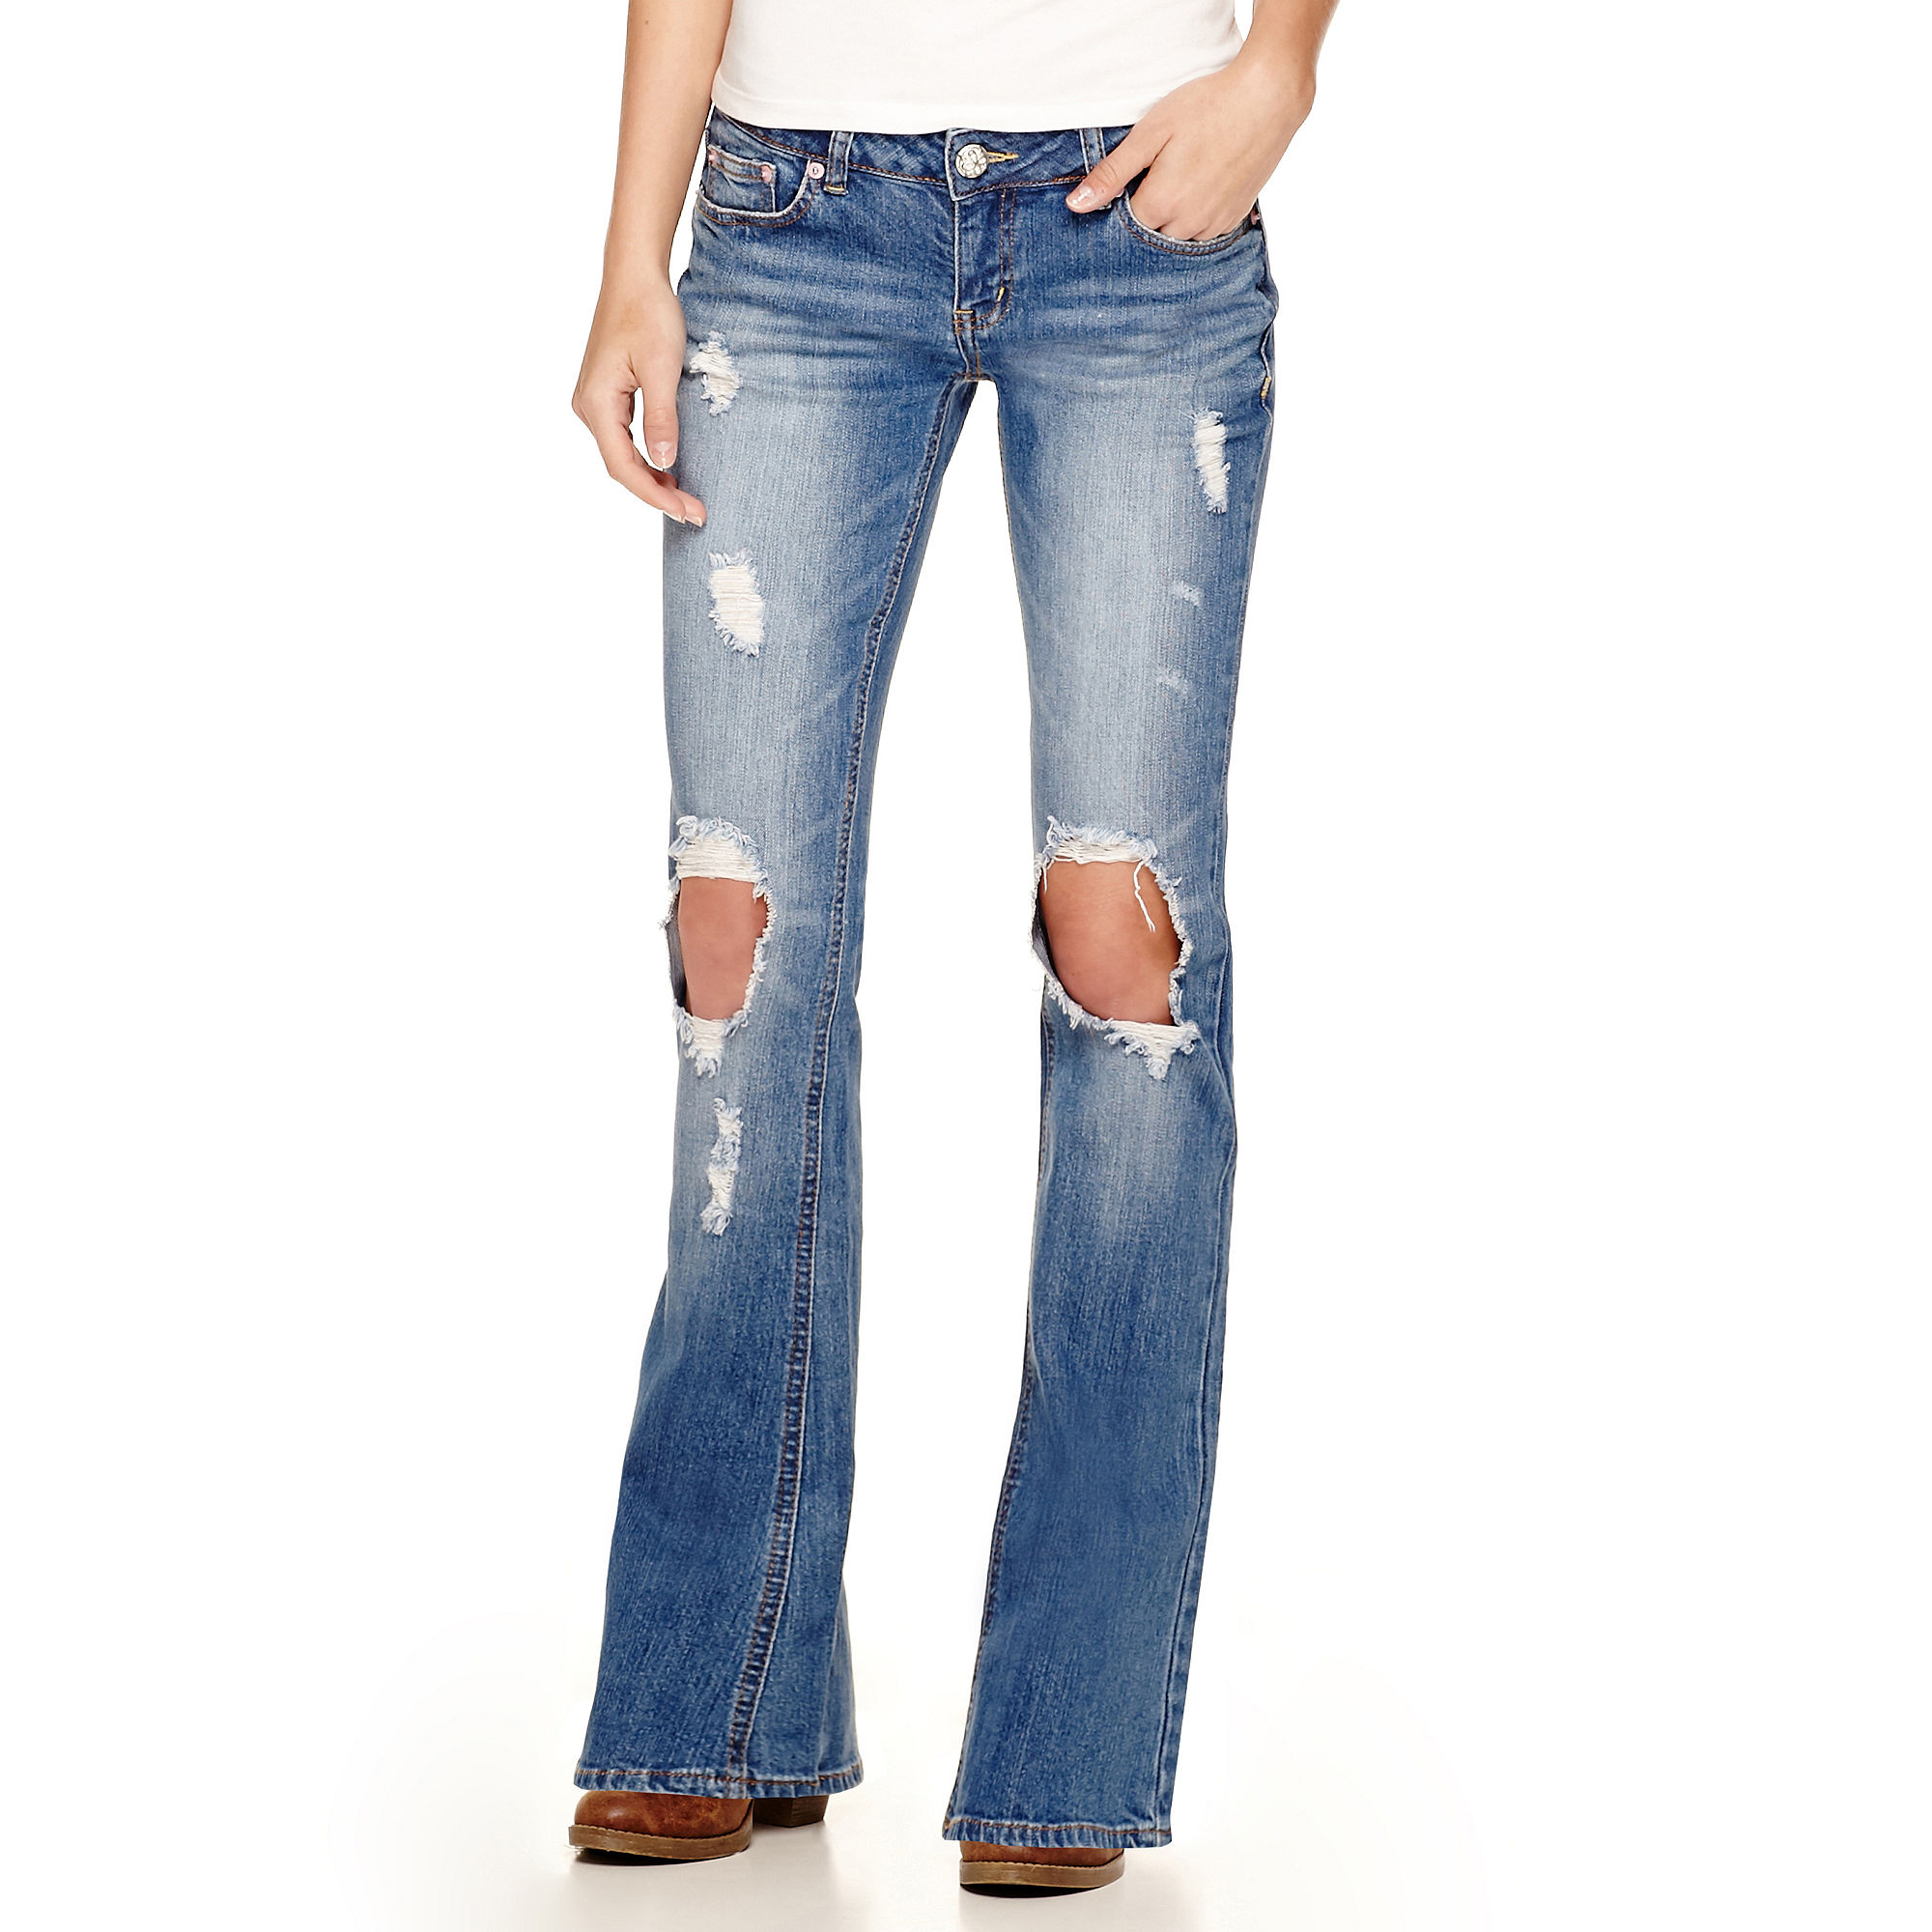 UPC 756575041121 product image for UNIONBAY Destructed Flared Jeans | upcitemdb.com